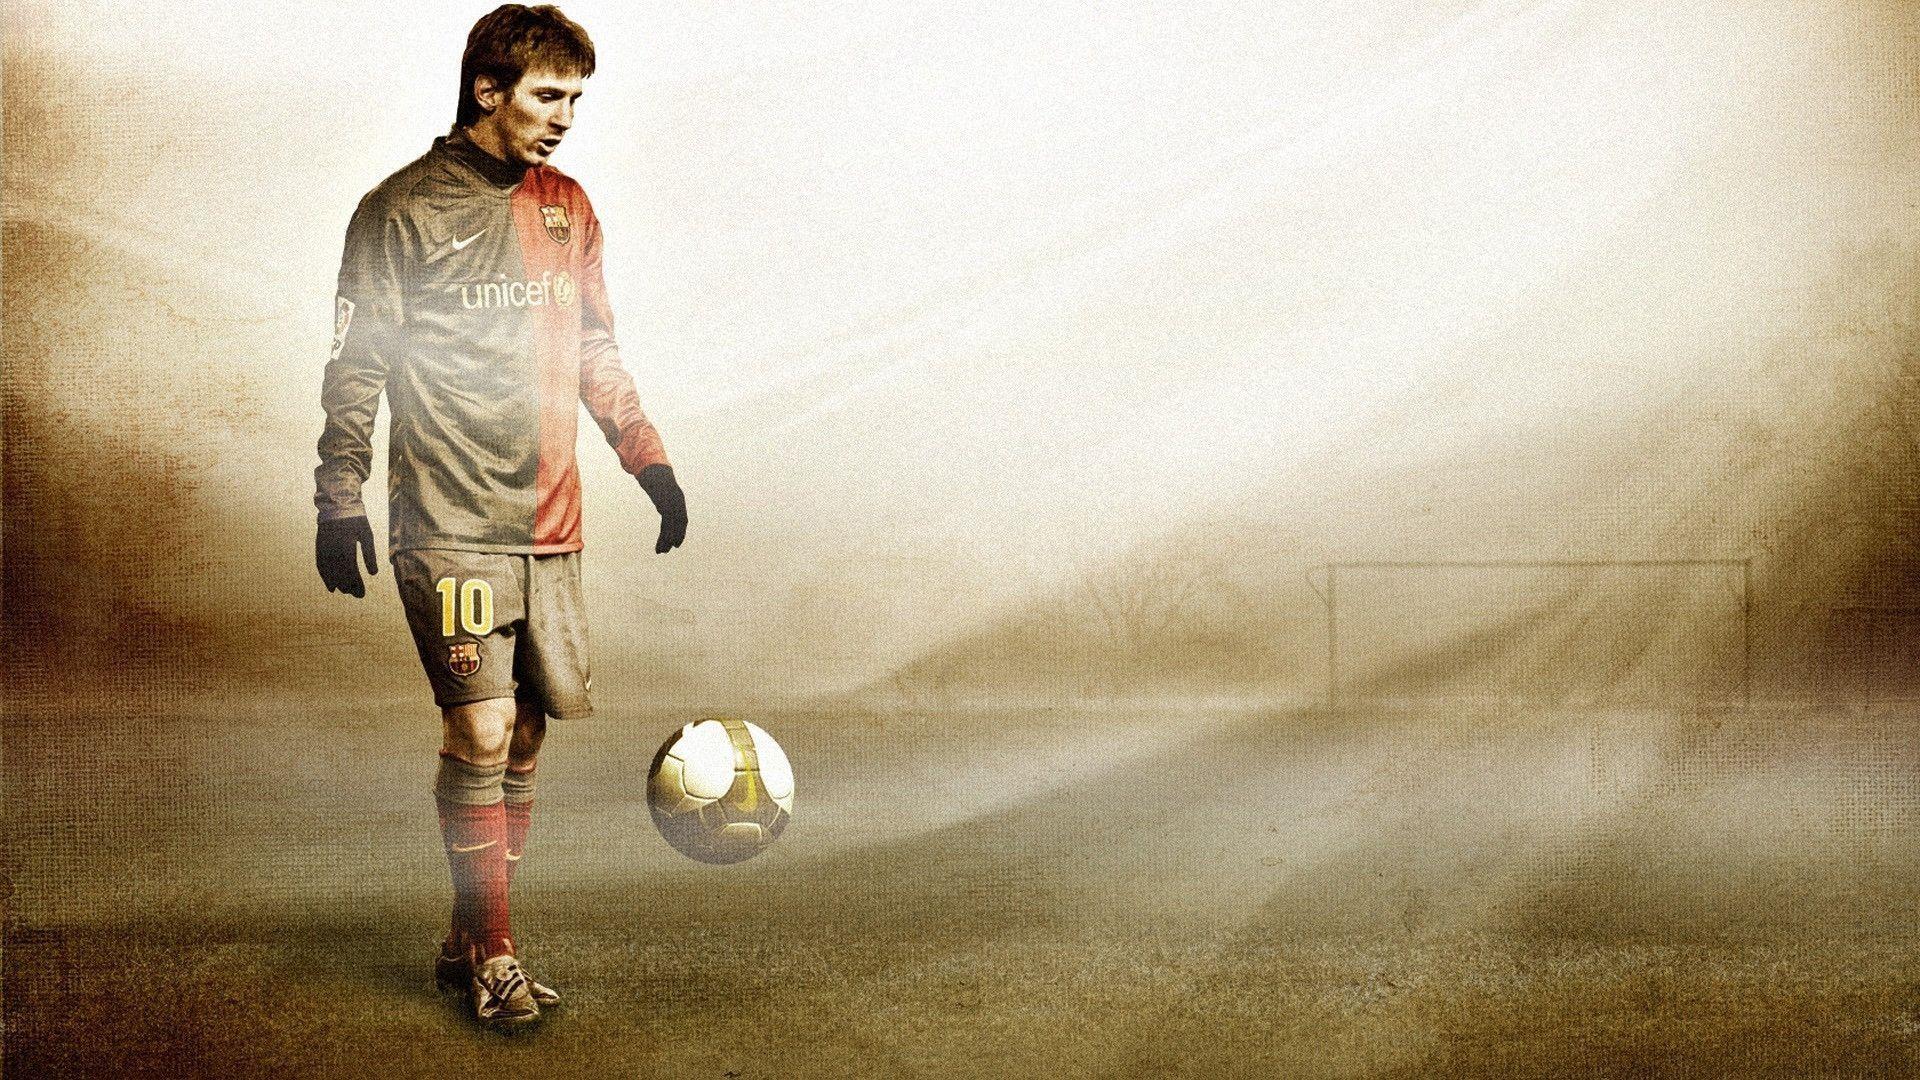 Messi wallpaper HD free wallpaper background image FHD